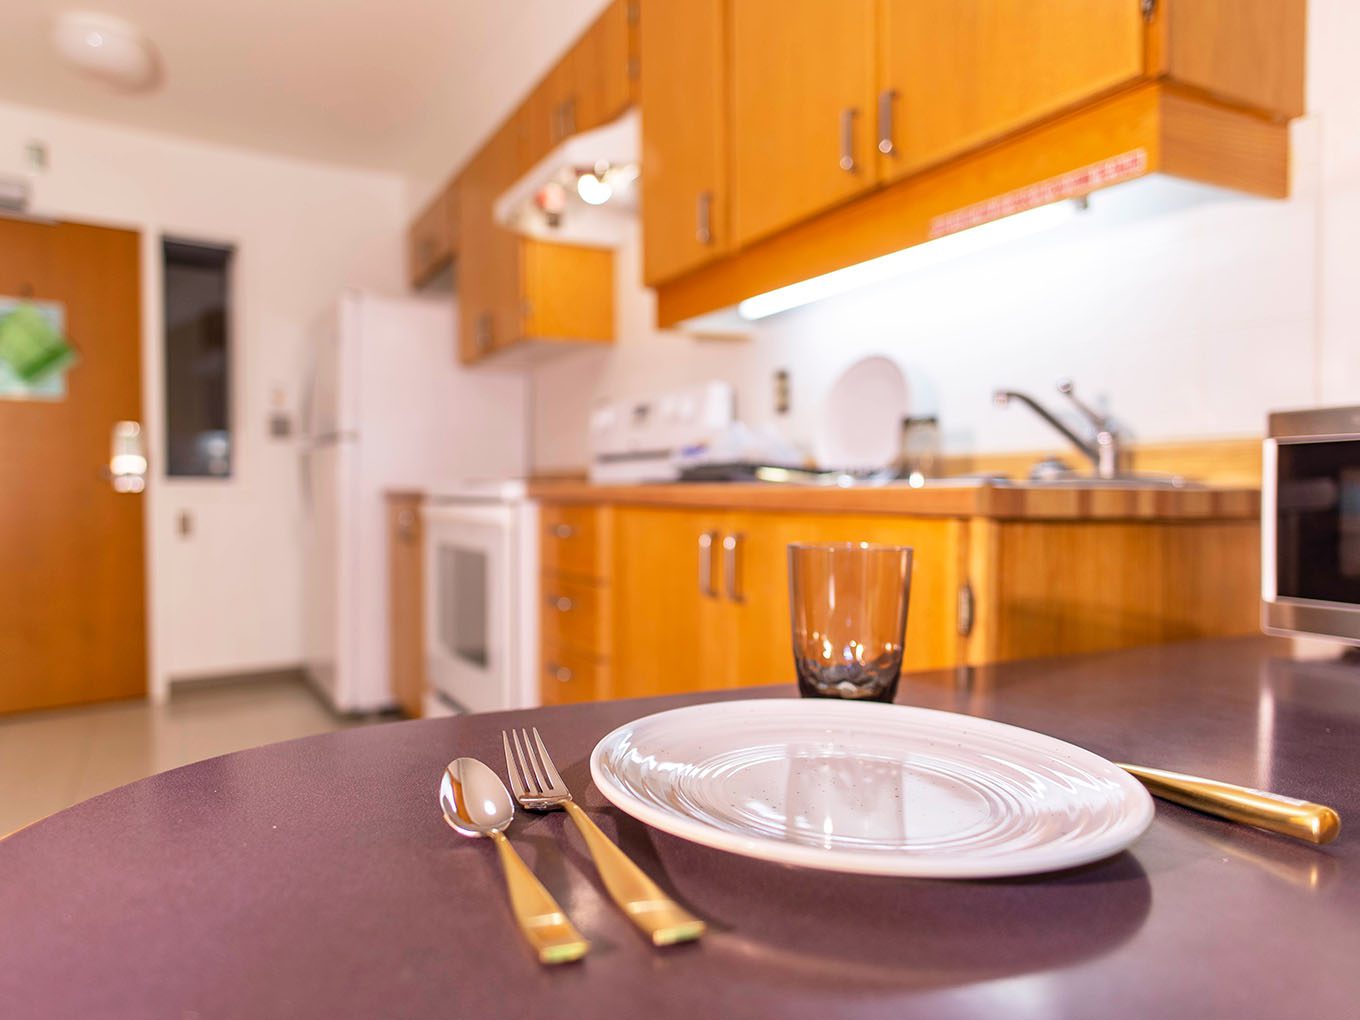 Suite and amenities - Kitchen